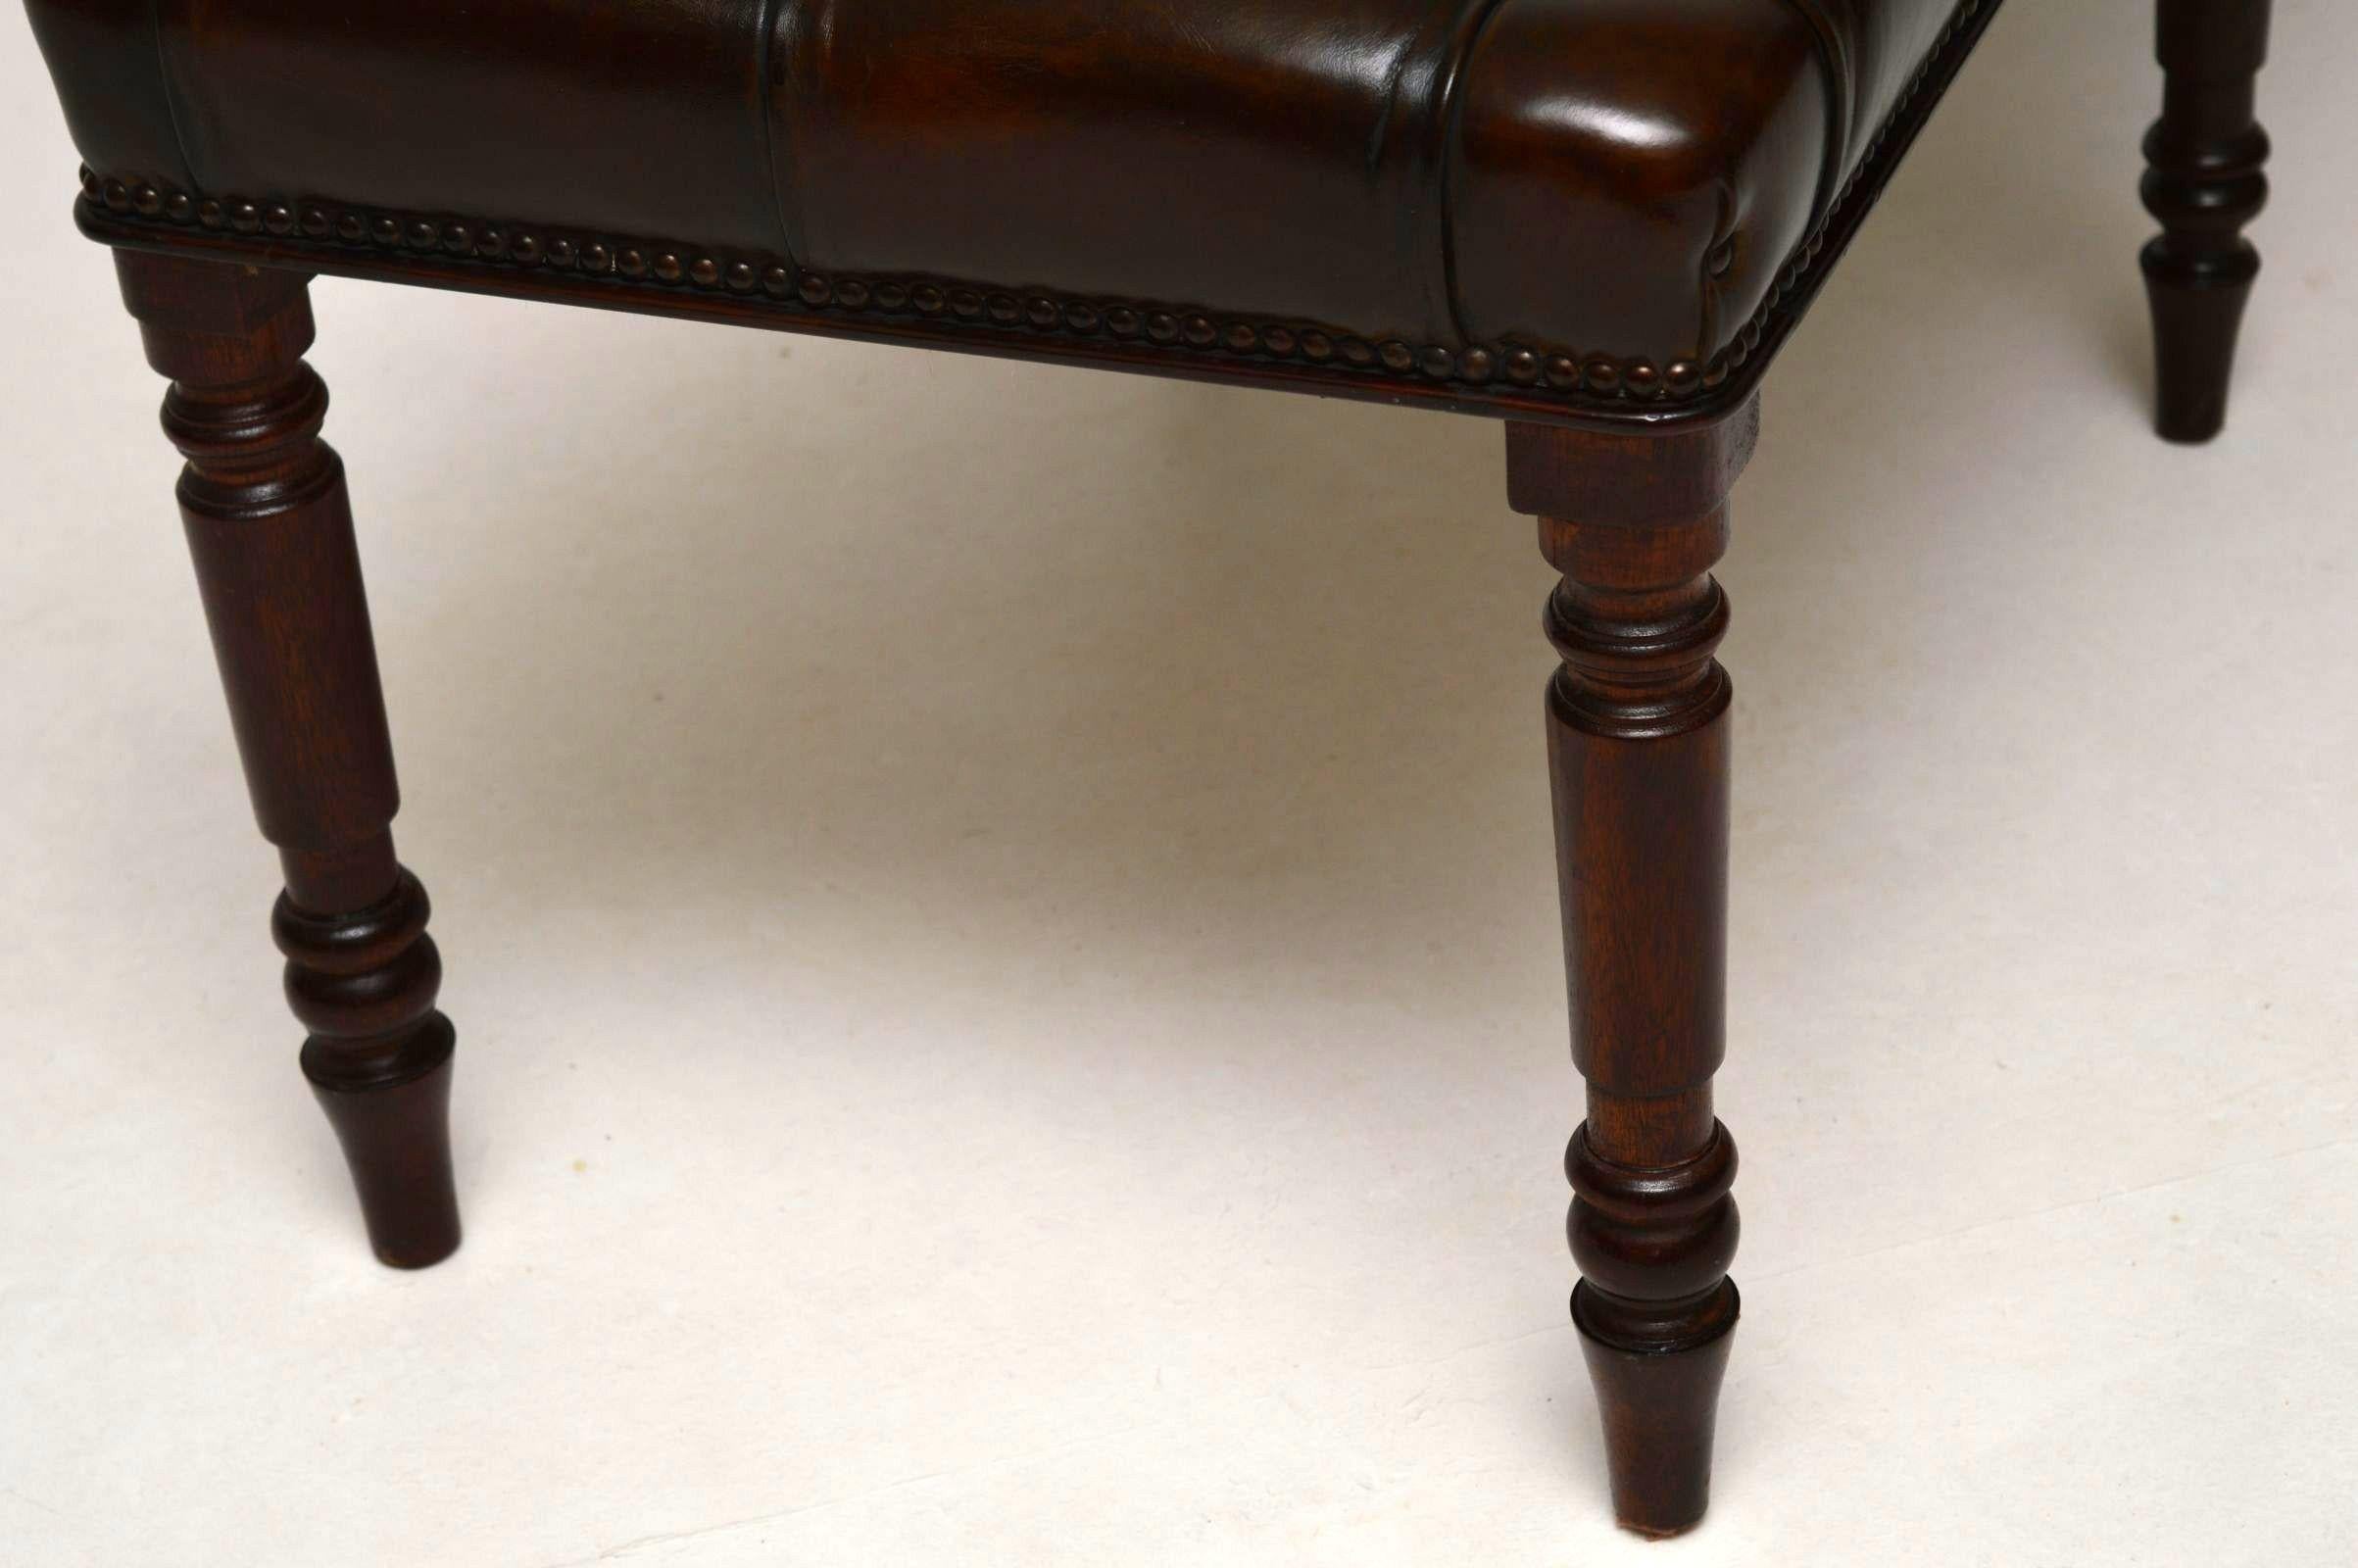 Mid-20th Century Antique Deep Buttoned Leather Stool on Mahogany Legs